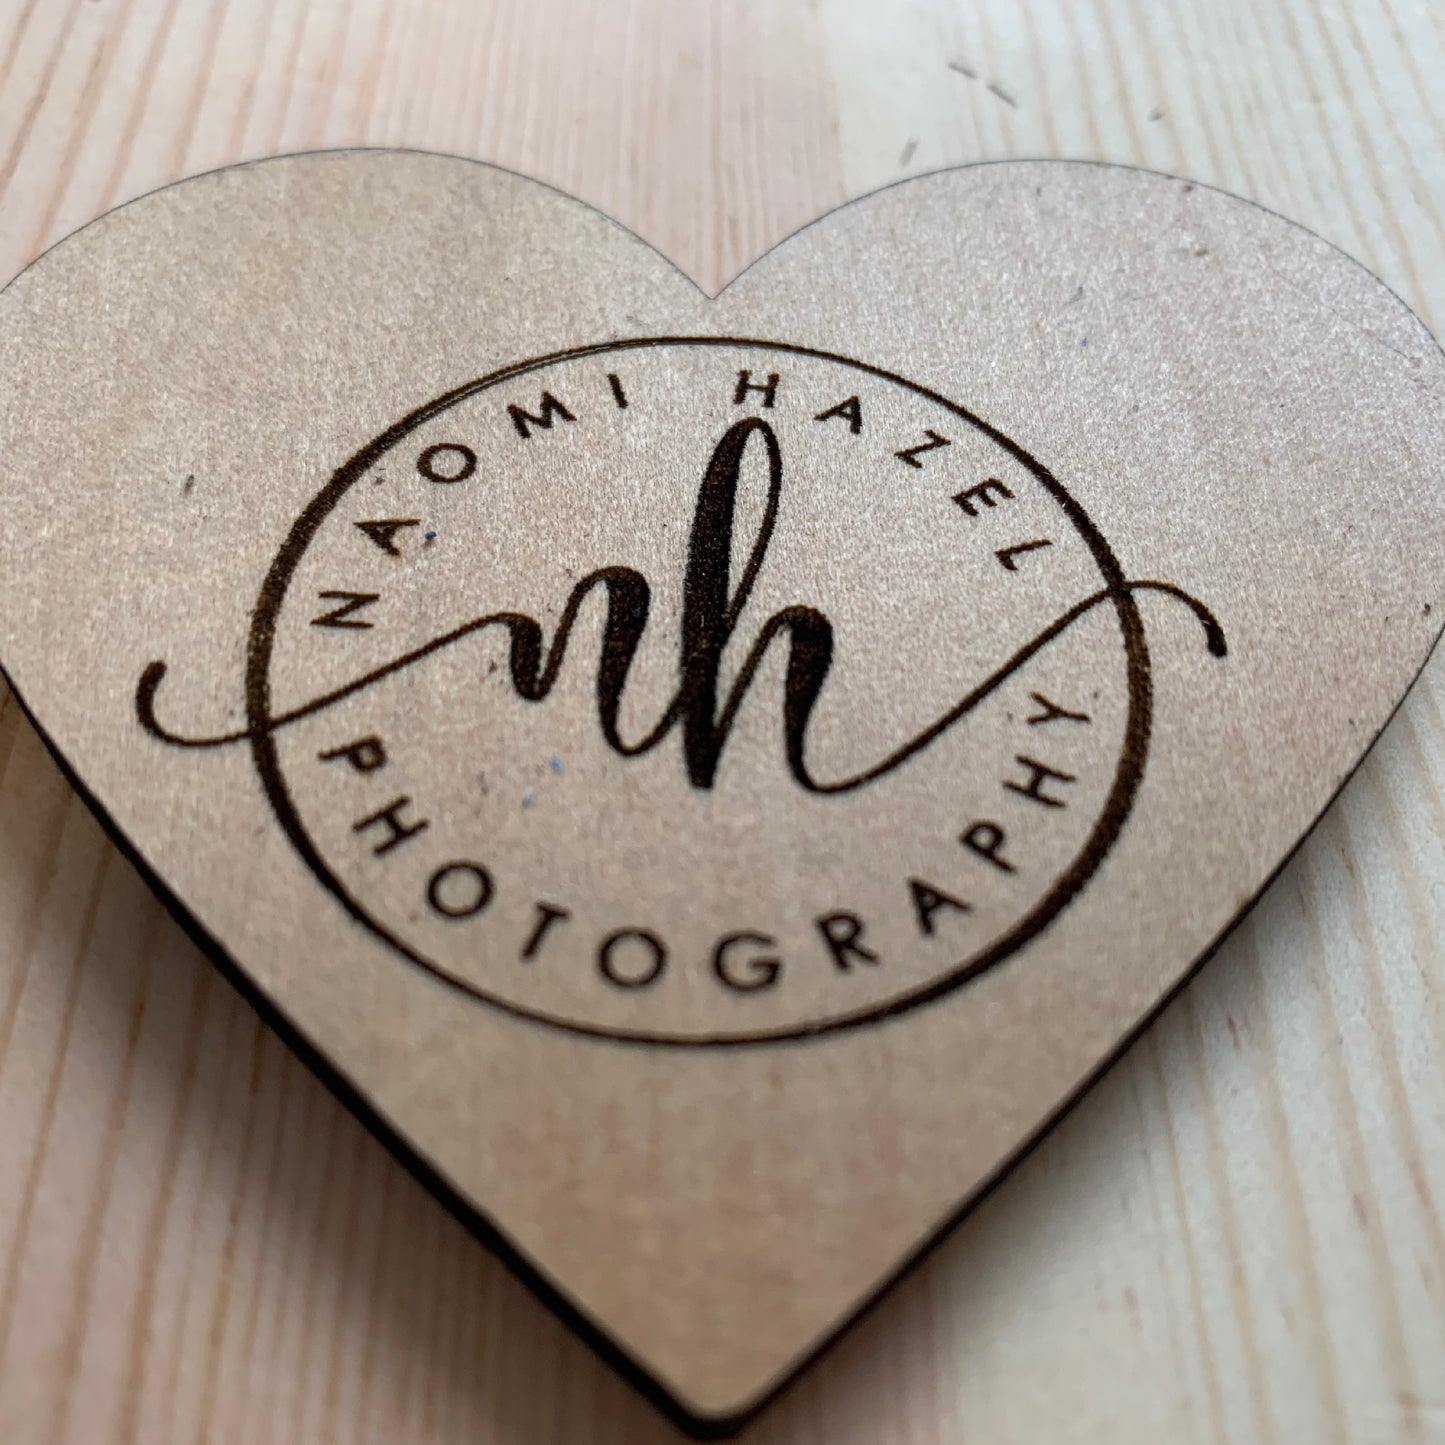 Heart Wood product tags, Set of 10 custom product tags, party favor tags, photography wood tag, wood tags, product tags